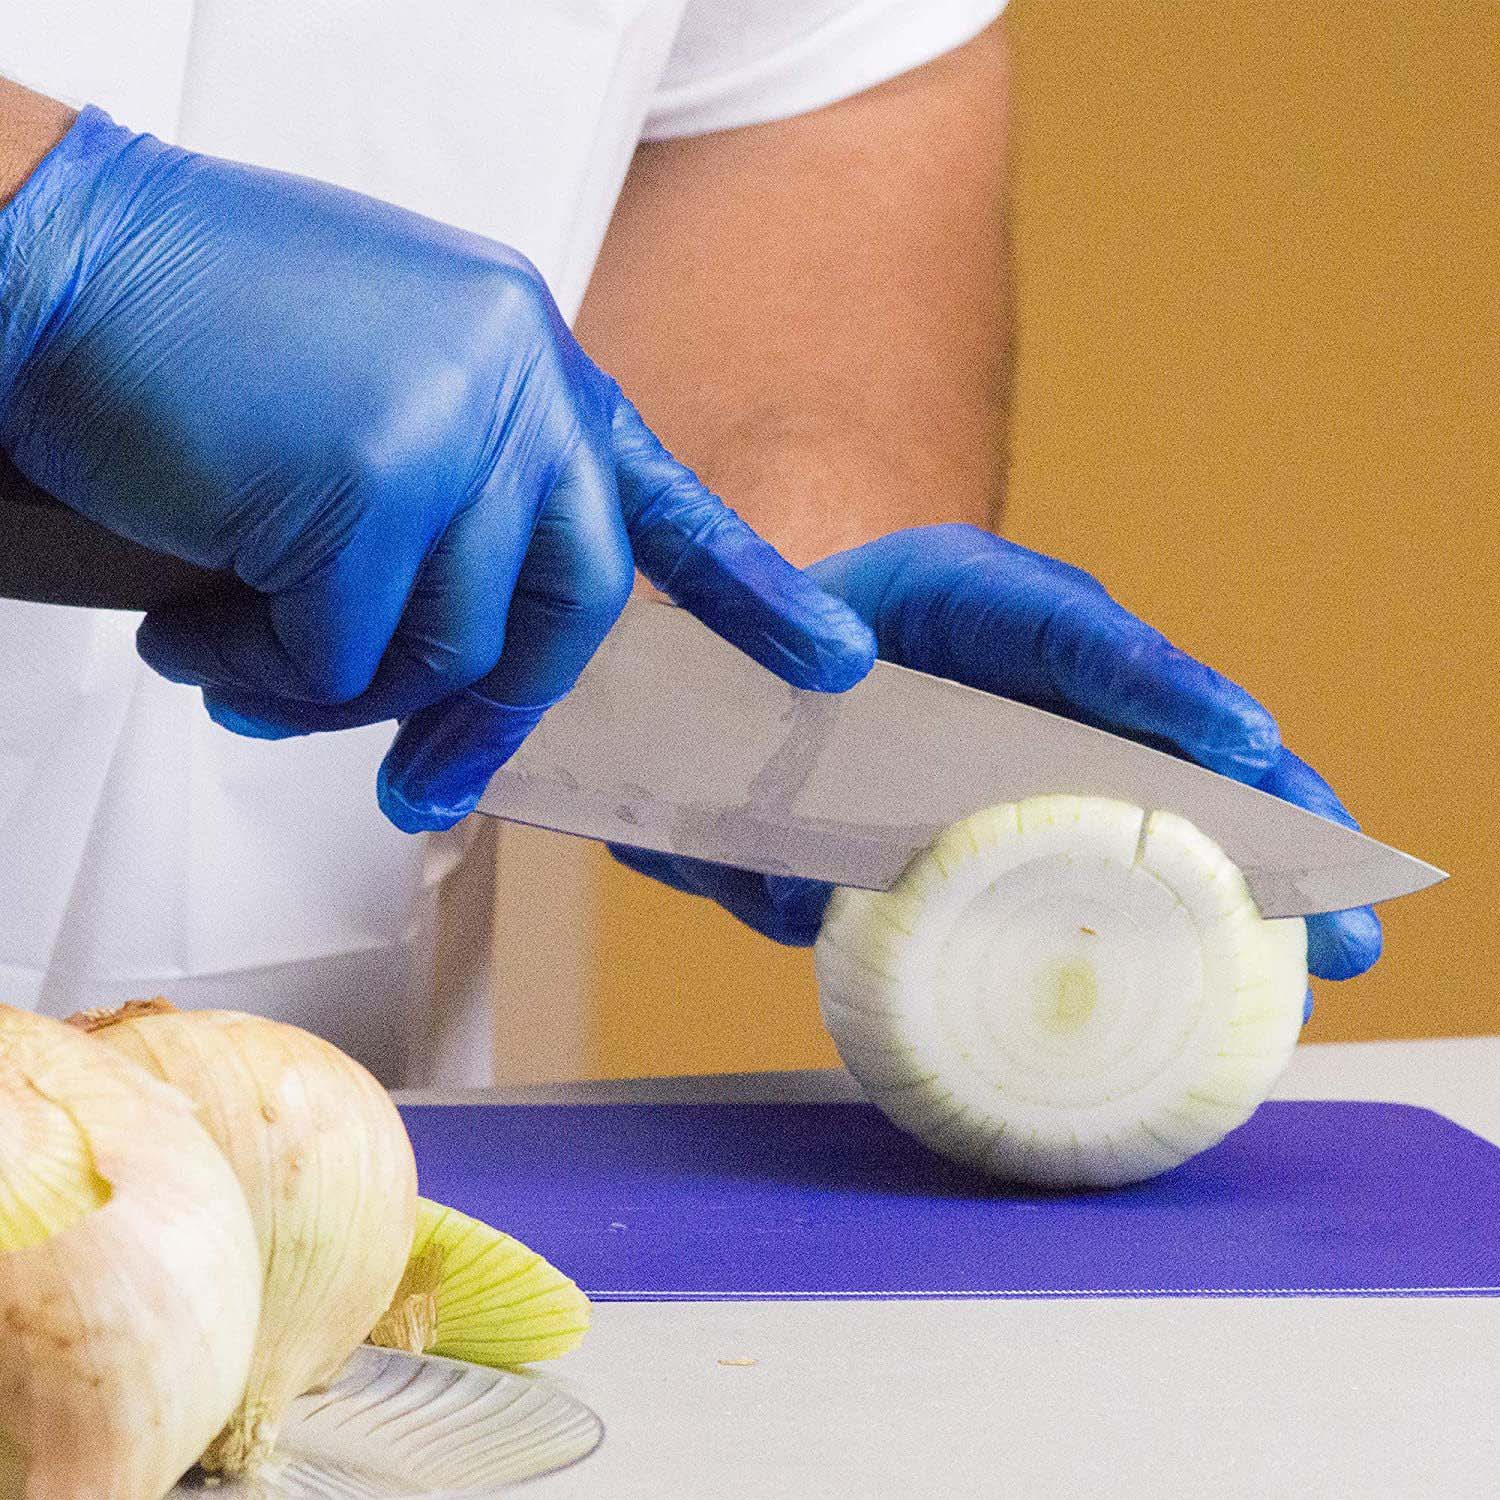 person wearing blue vinyl gloves while slicing a food